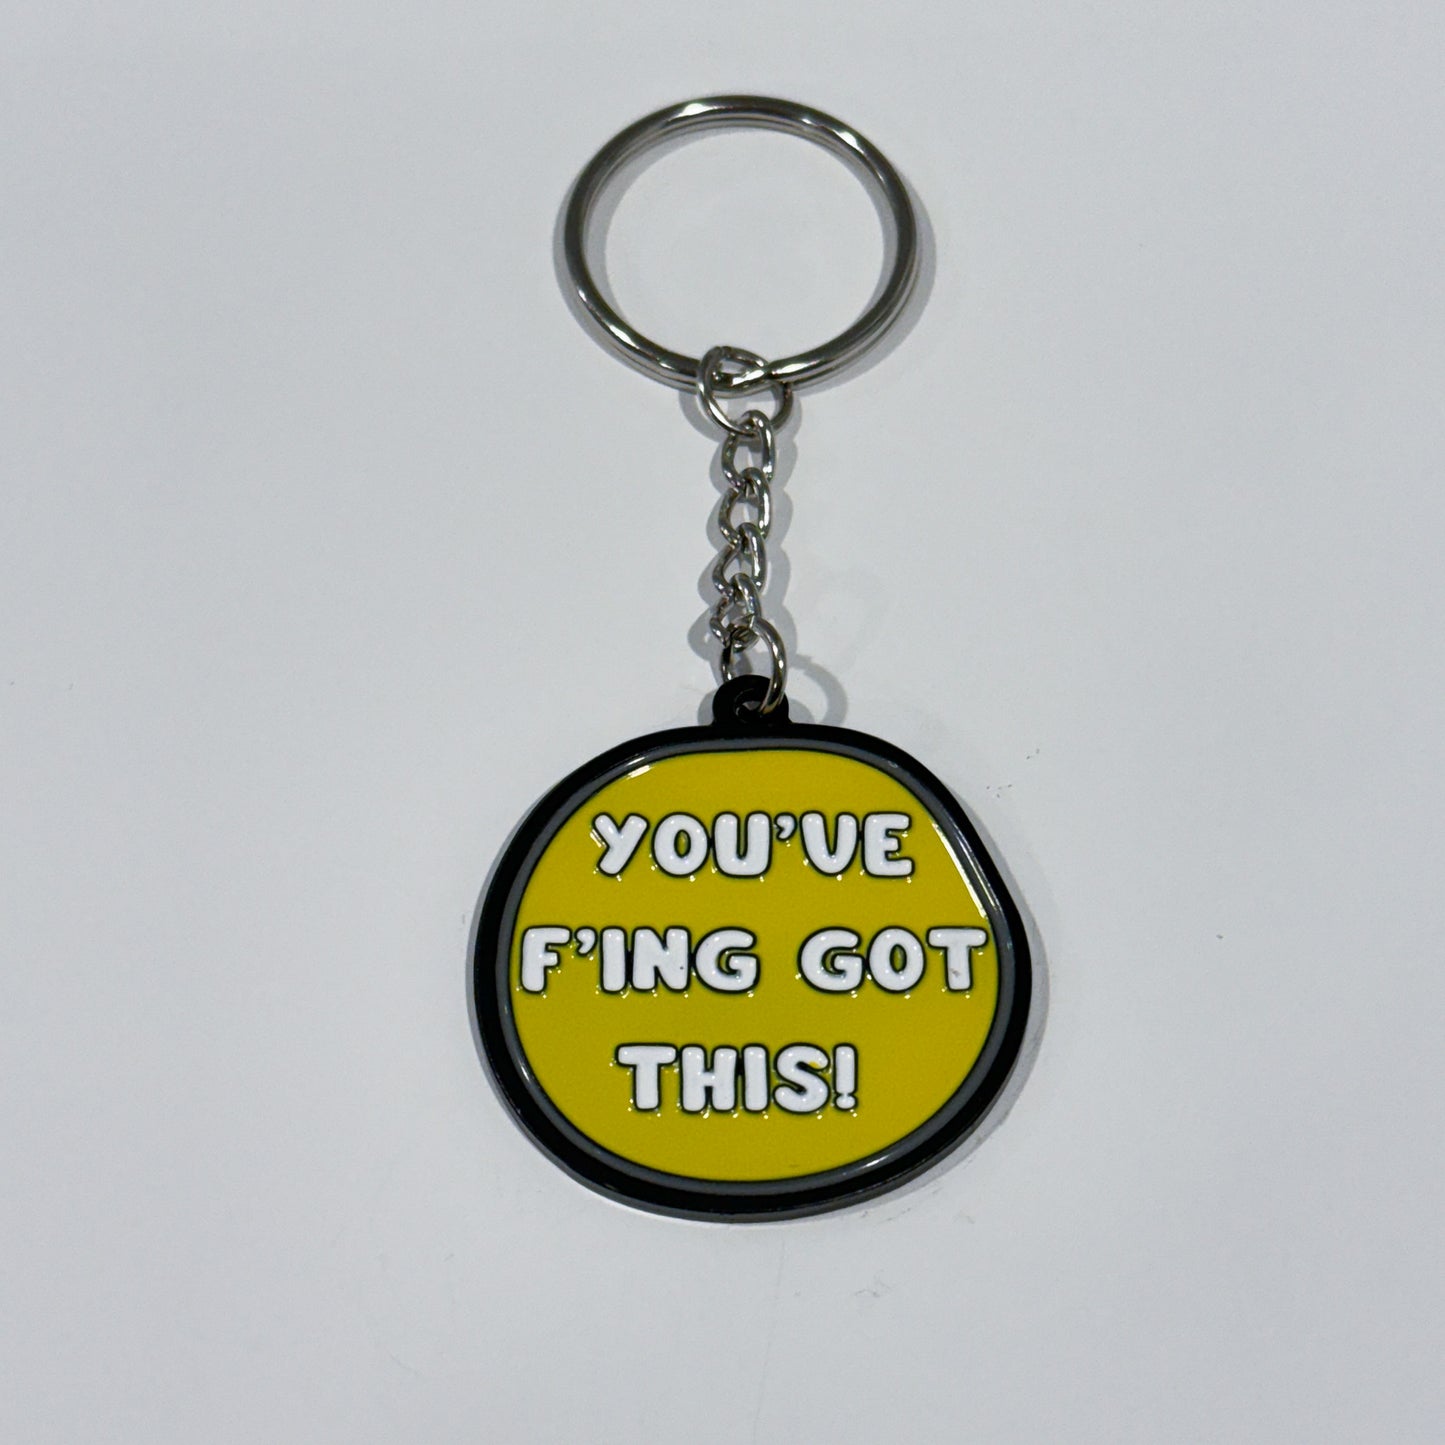 You've F'ing Got This! - Funny Motivational Keychain/Pin